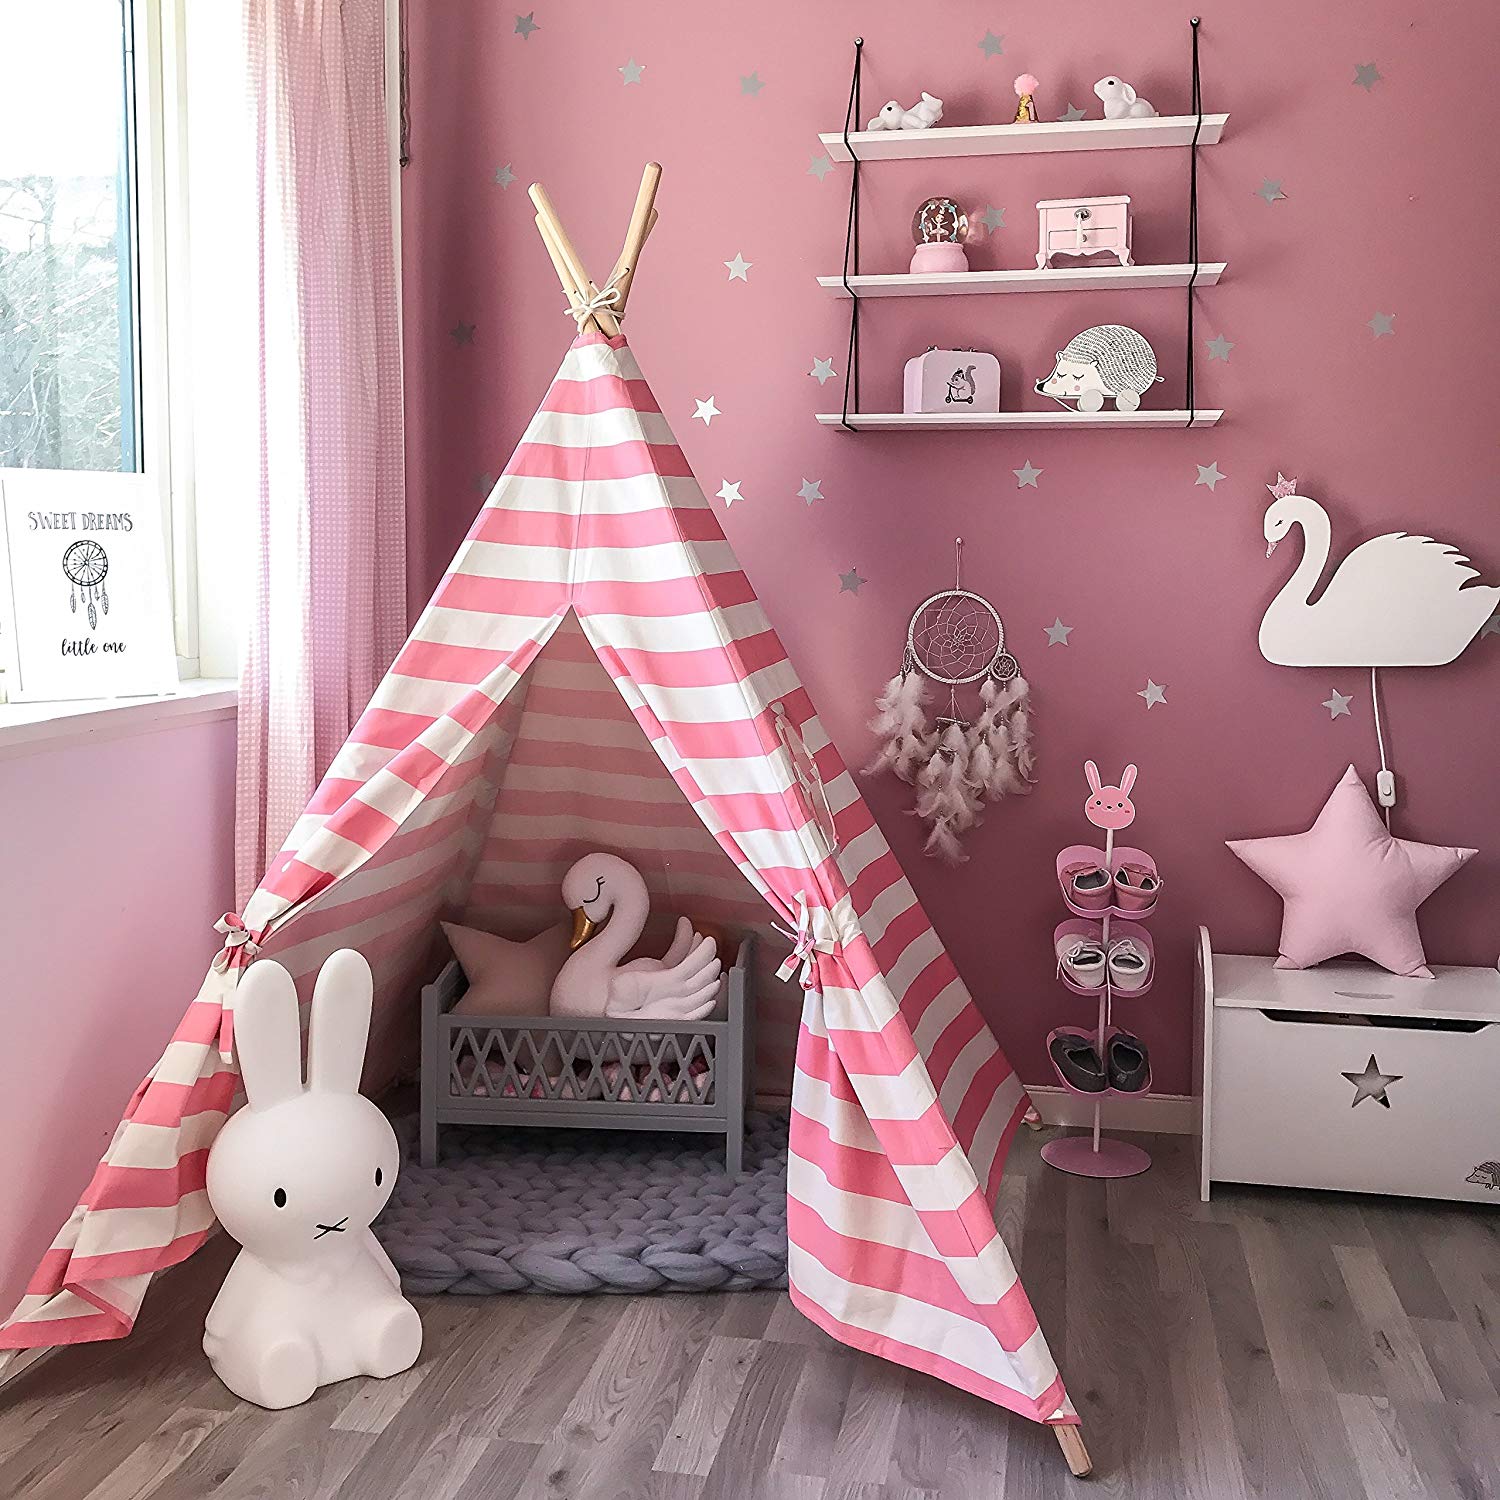 AIOIAI Kids Teepee Tent for Girls Princess, 5' Canvas Childrens Play Tent for Indoor Outdoor with Carry Case , Pink & White Stripe 